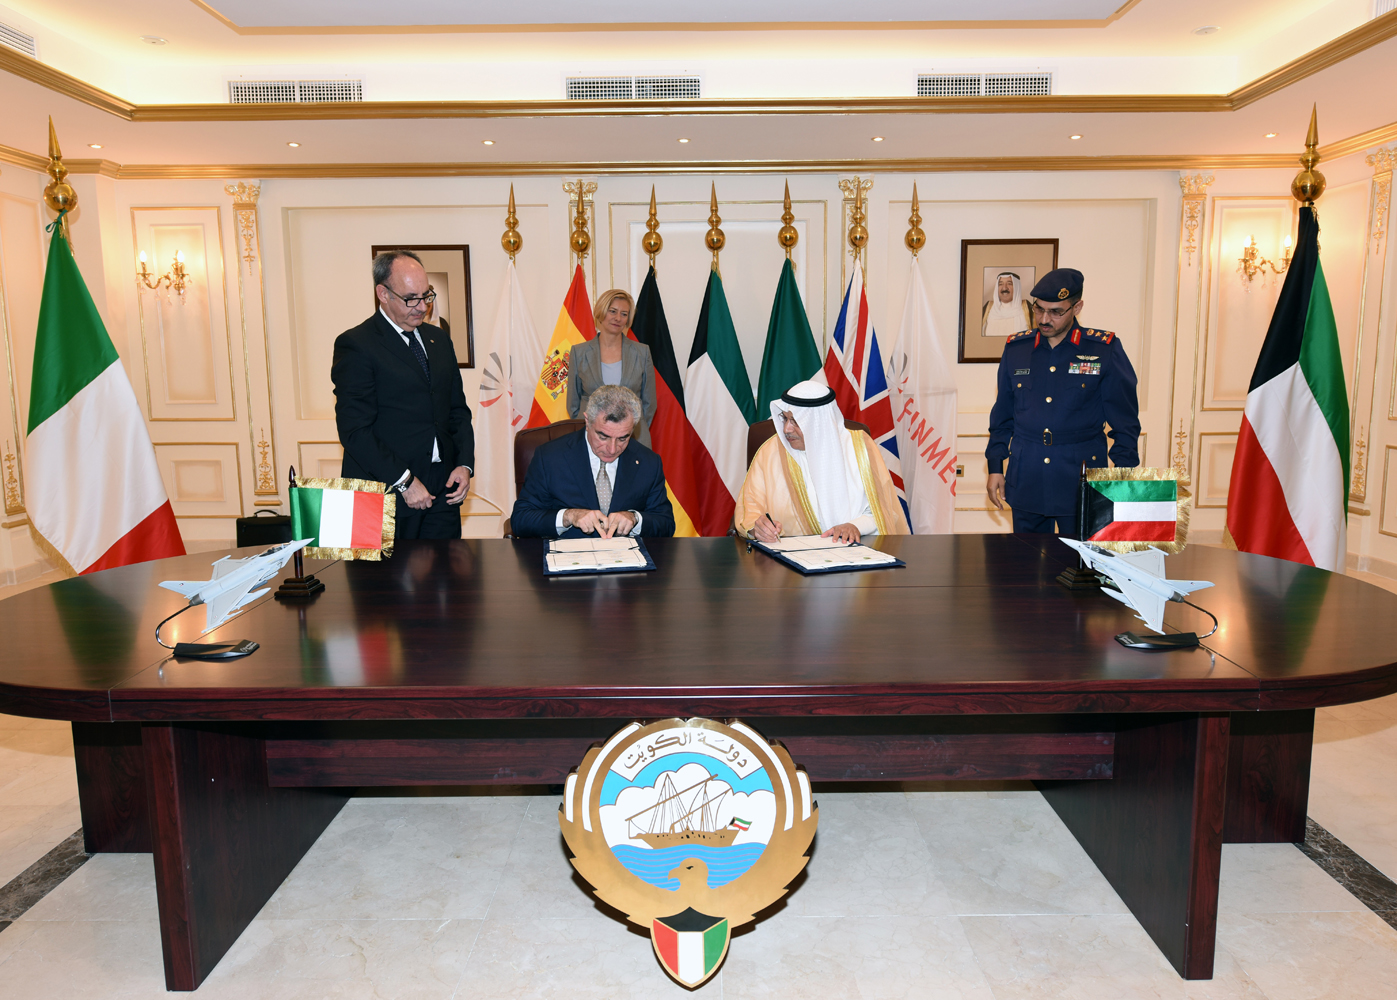 Deputy Prime Minister and Defense Minister Sheikh Khaled Al-Jarrah Al-Sabah and Finmeccanica CEO Mauro Moretti during signing ceremony